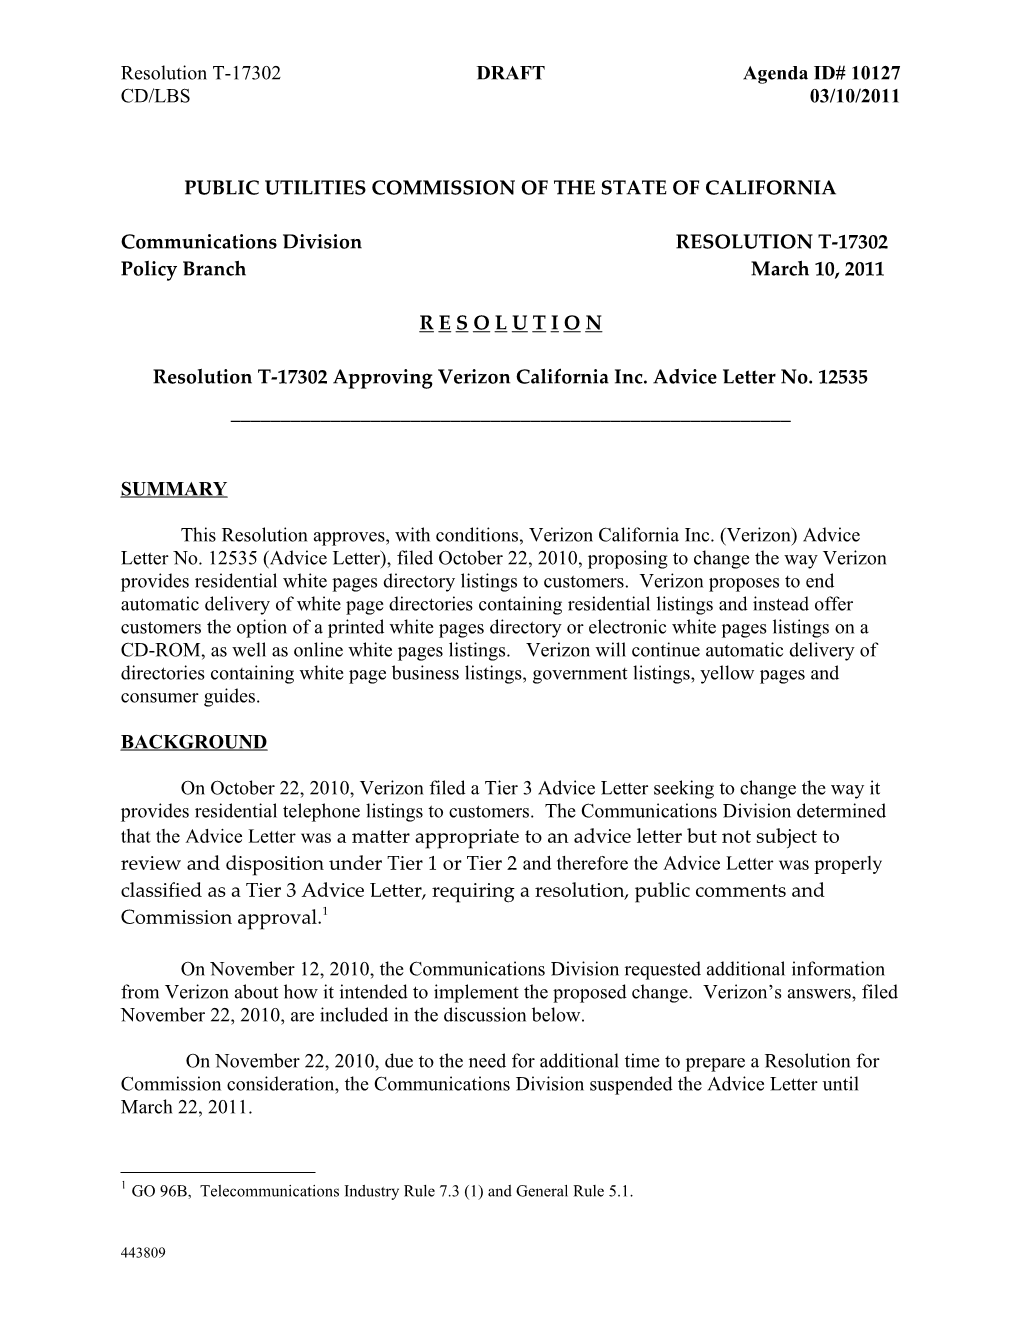 Public Utilities Commission of the State of California